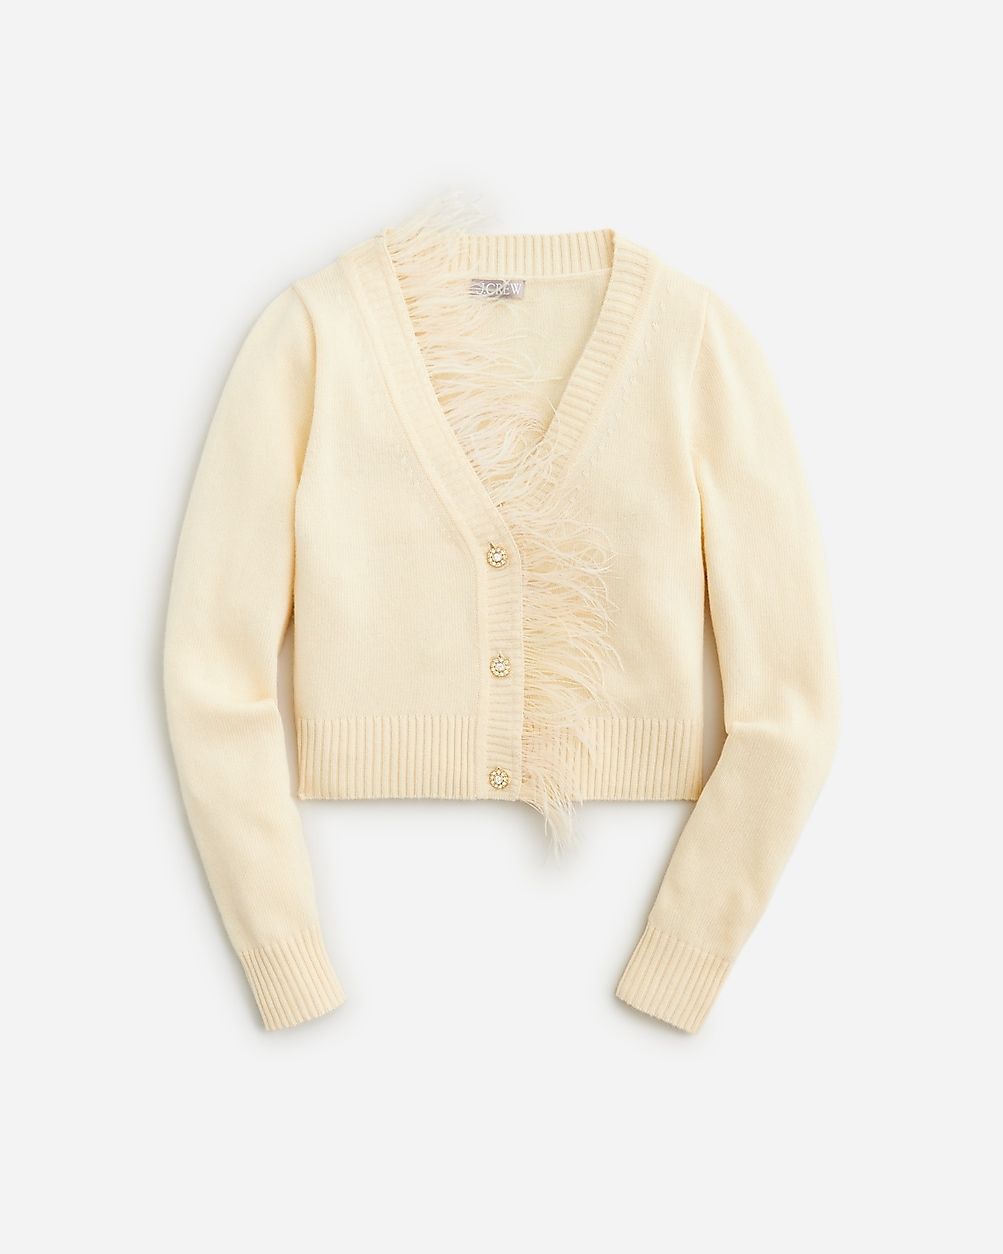 Feather-trim cropped cardigan sweater with jewel buttons | J.Crew US